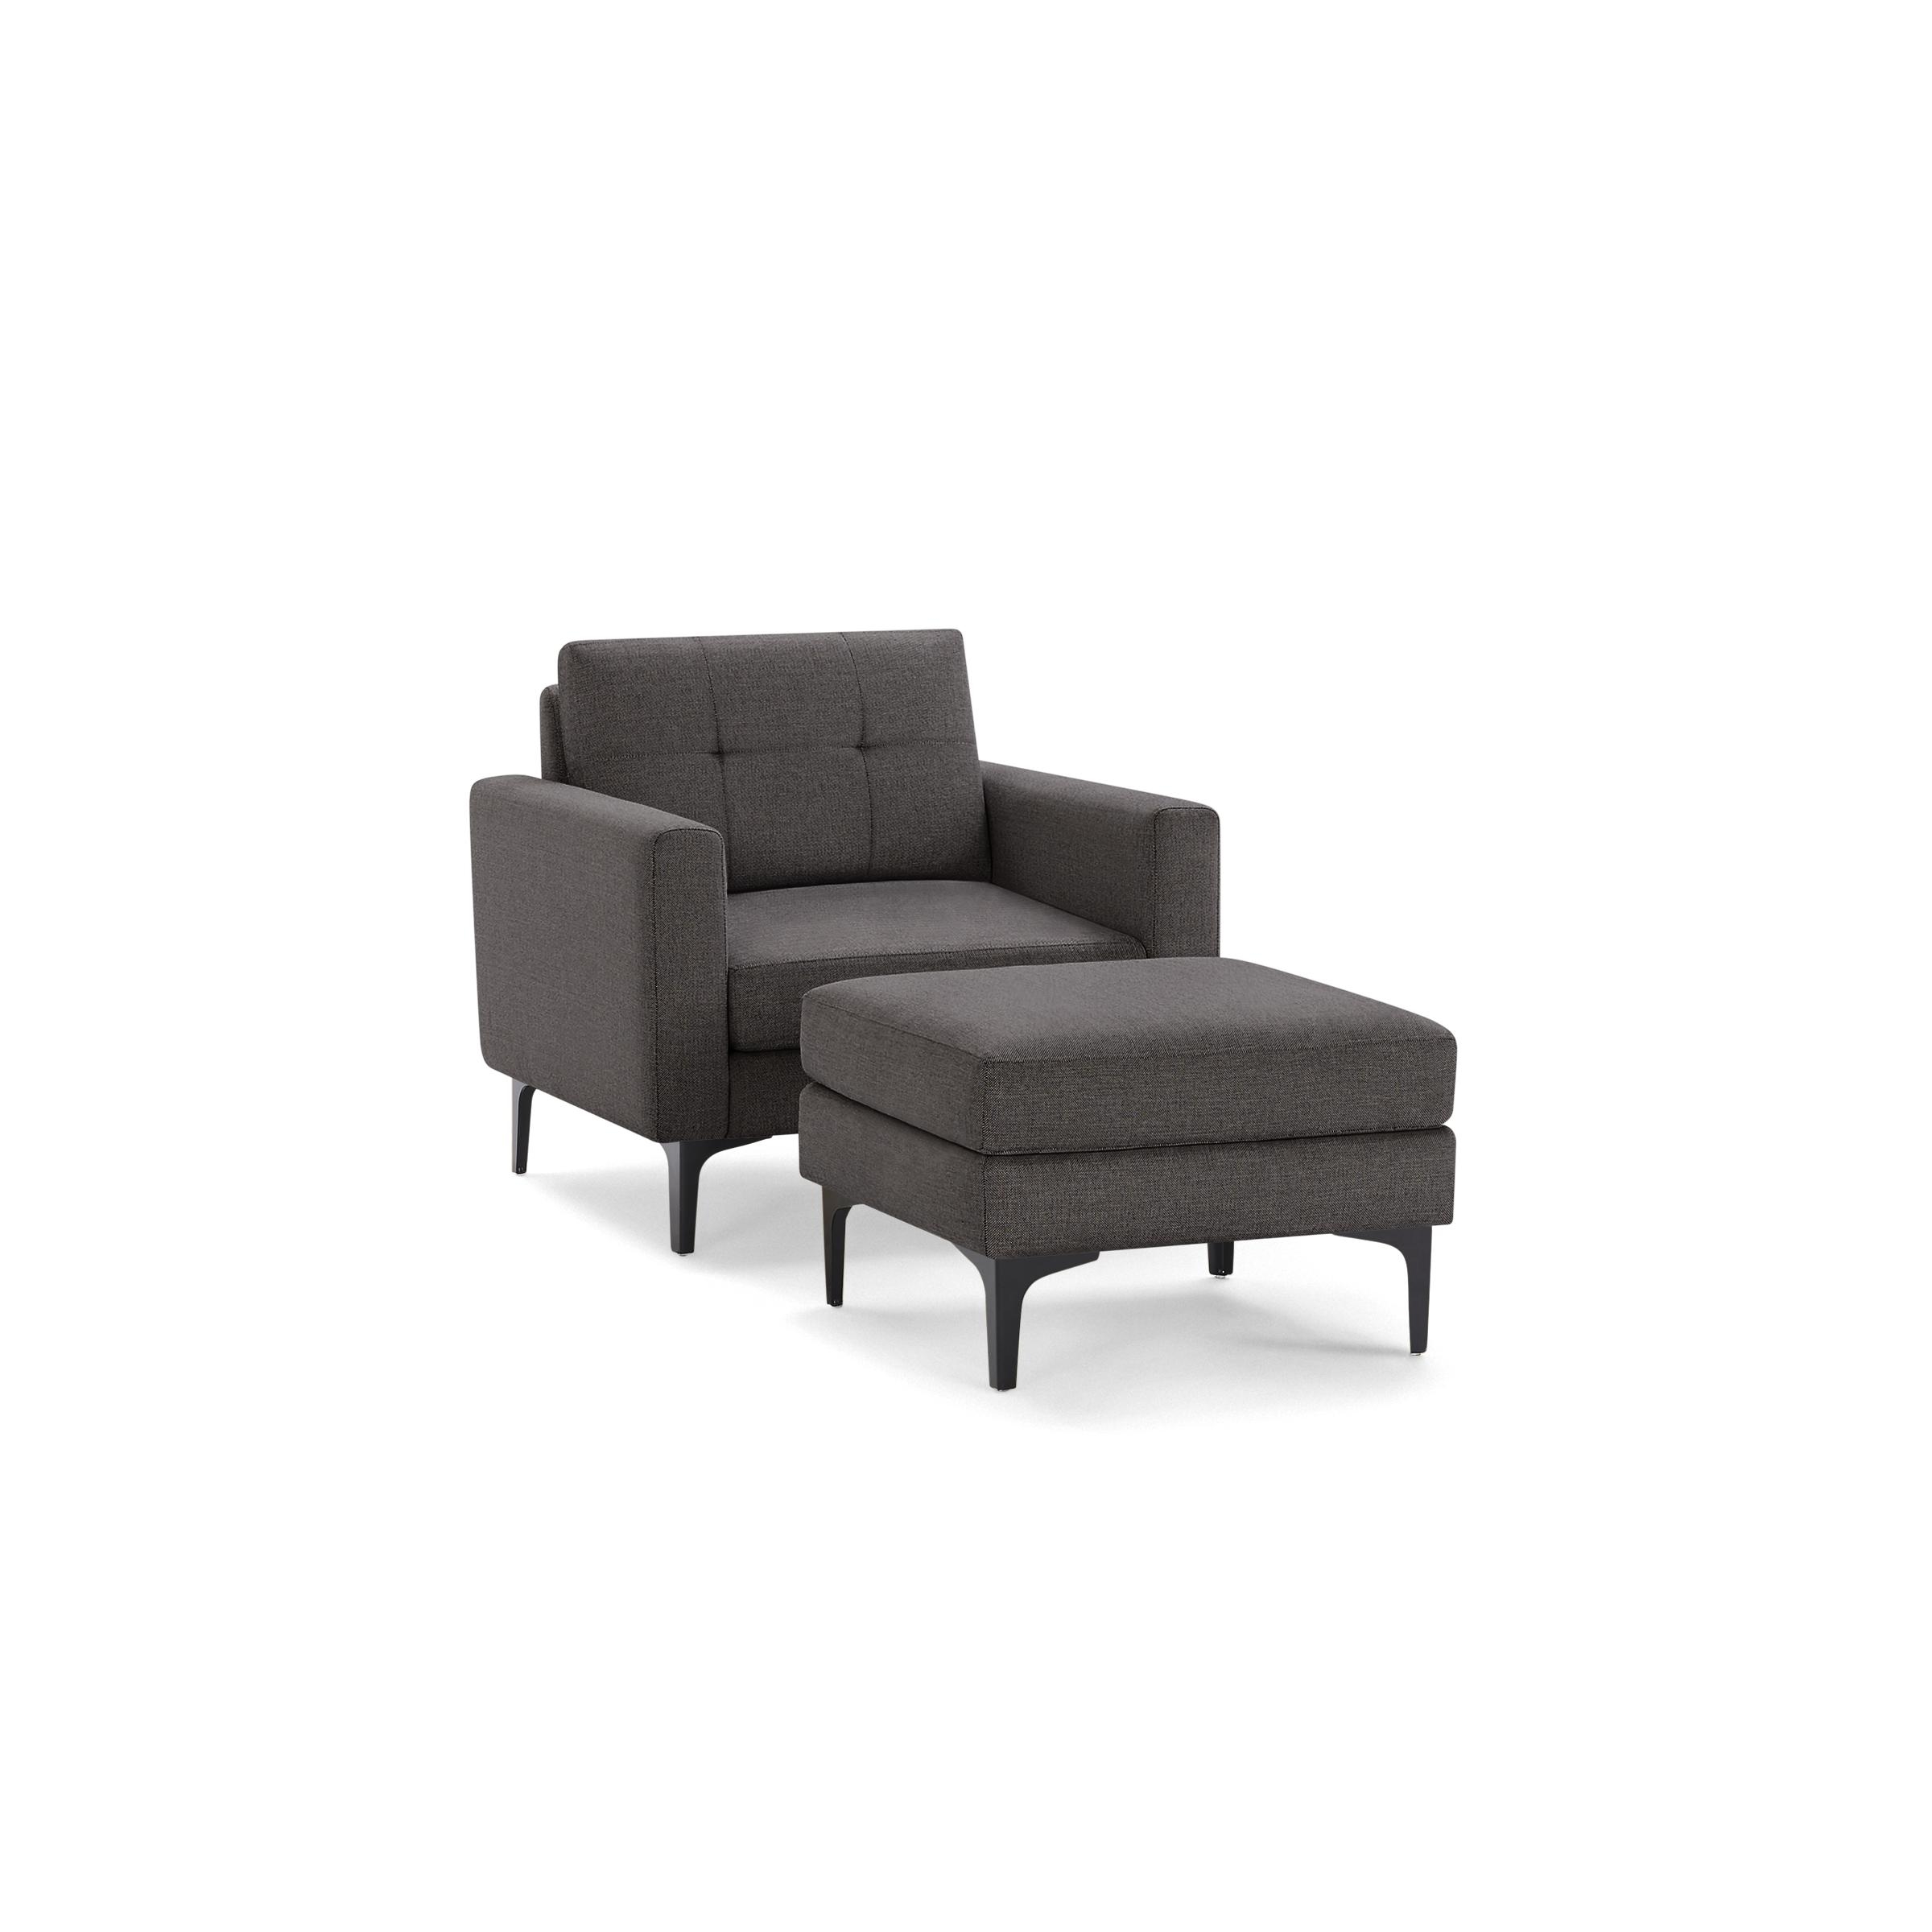 Nomad Armchair and Ottoman in Charcoal - Image 0